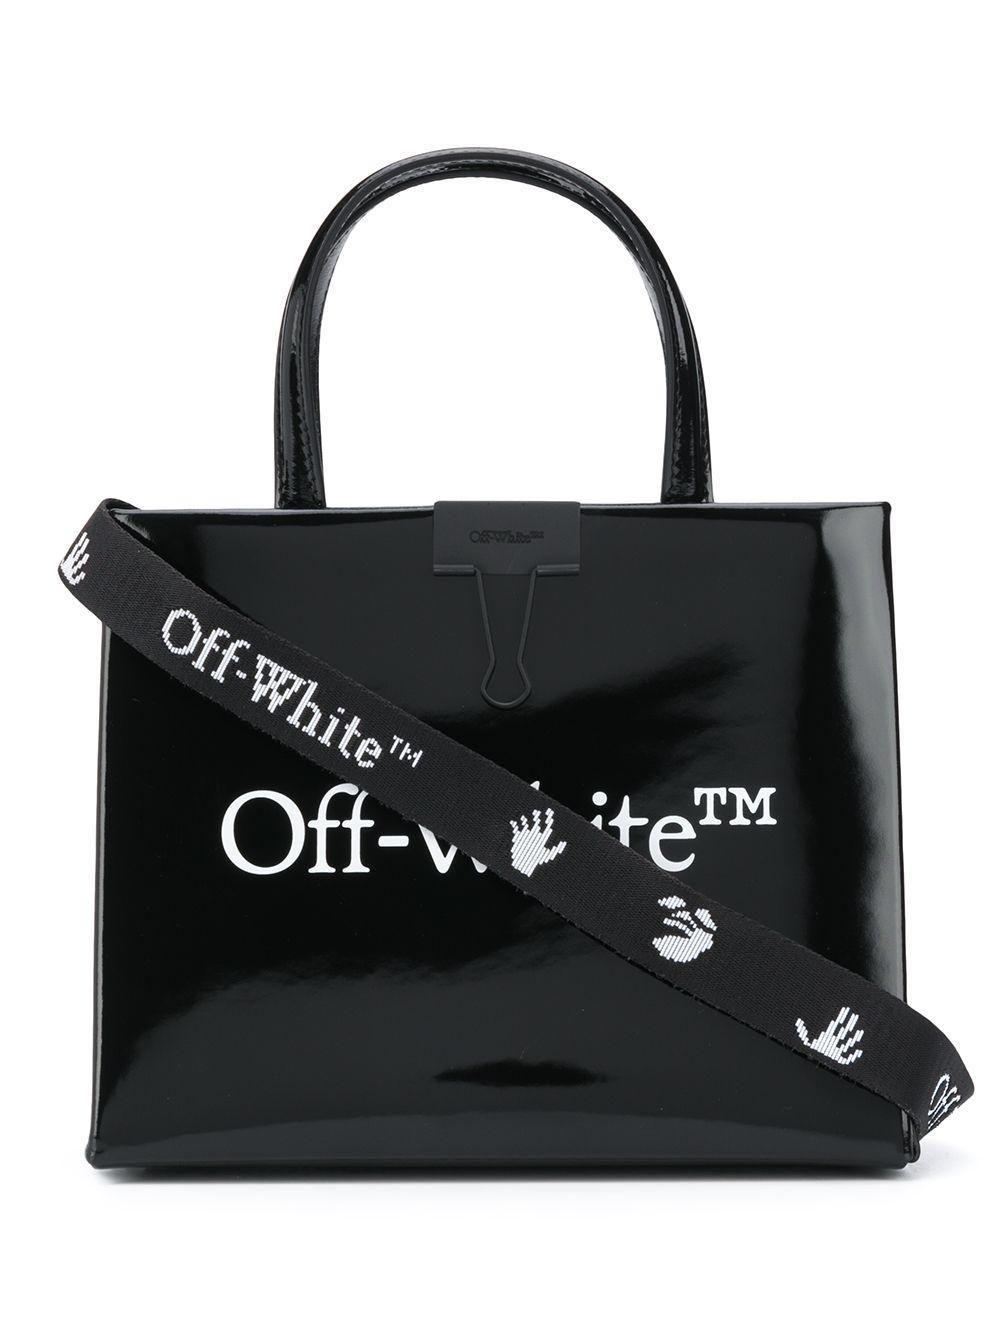 Off-White c/o Virgil Abloh Small Box Tote Bag in Black | Lyst